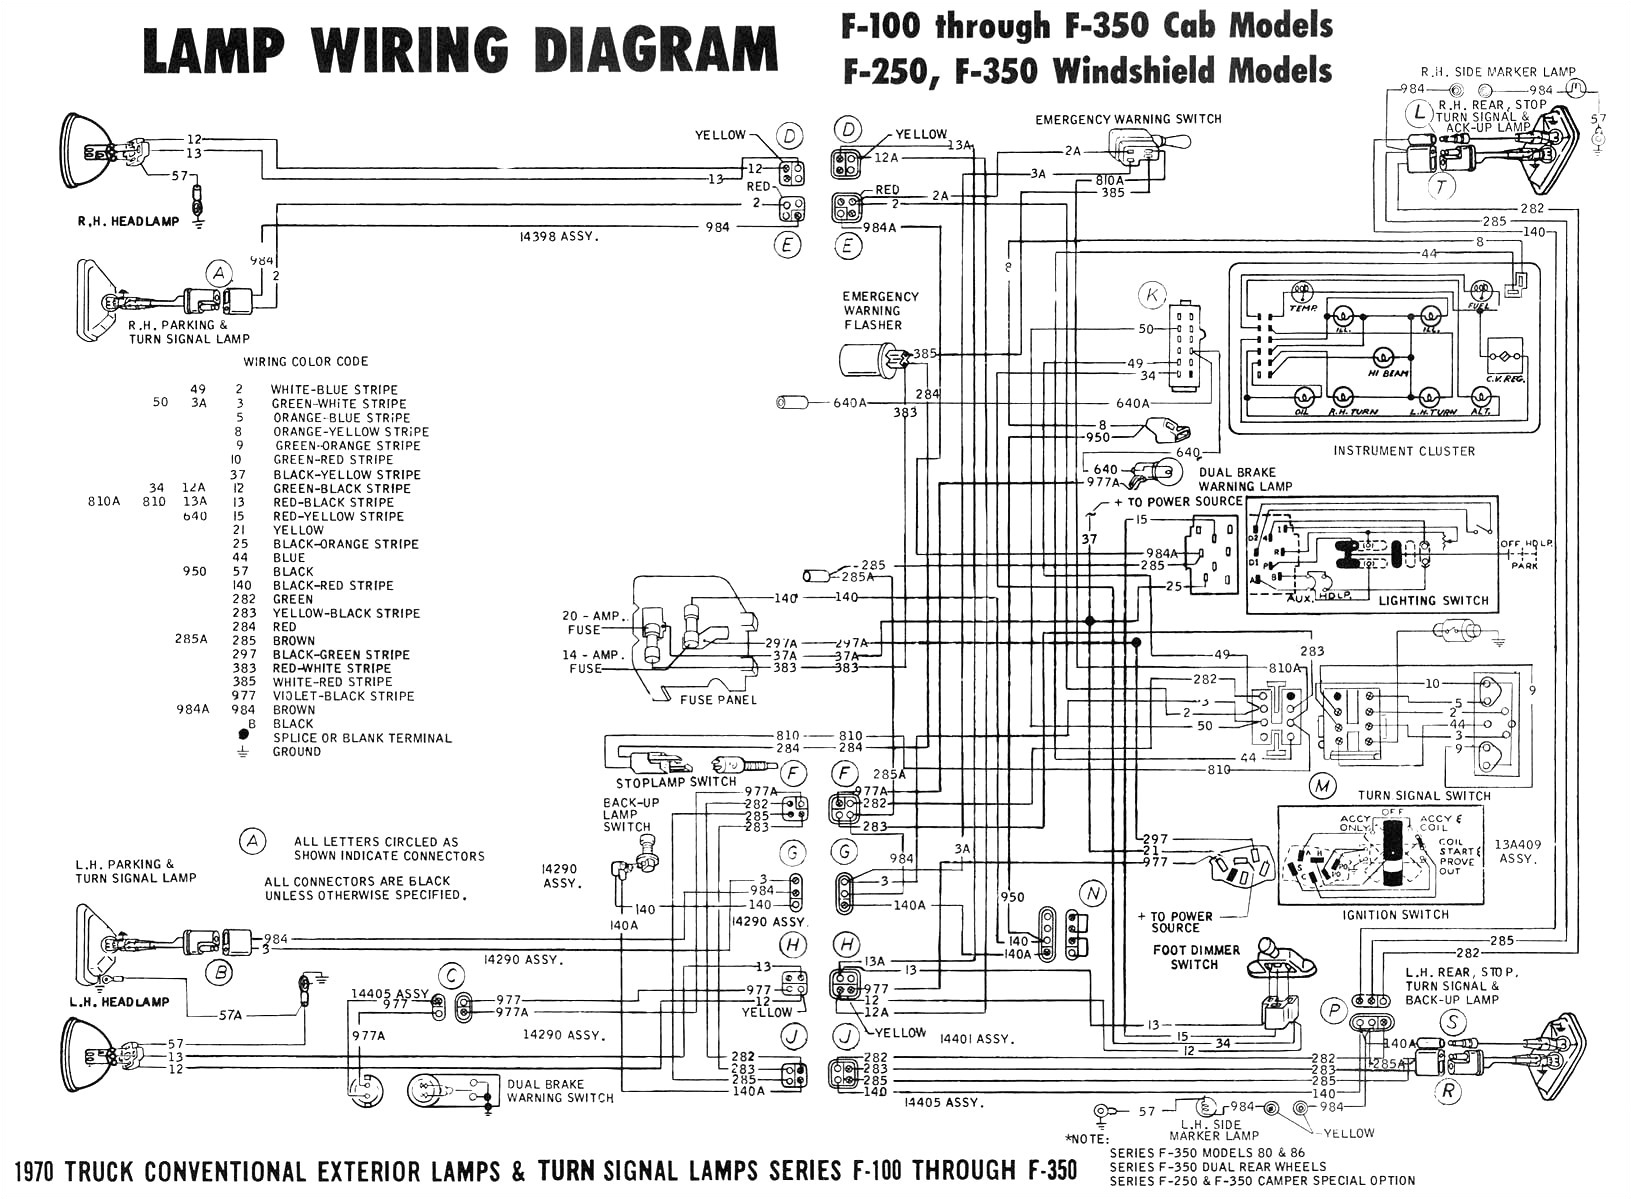 2004 ford expedition transmission diagram wiring diagram files 2004 ford expedition transmission diagram use wiring diagram